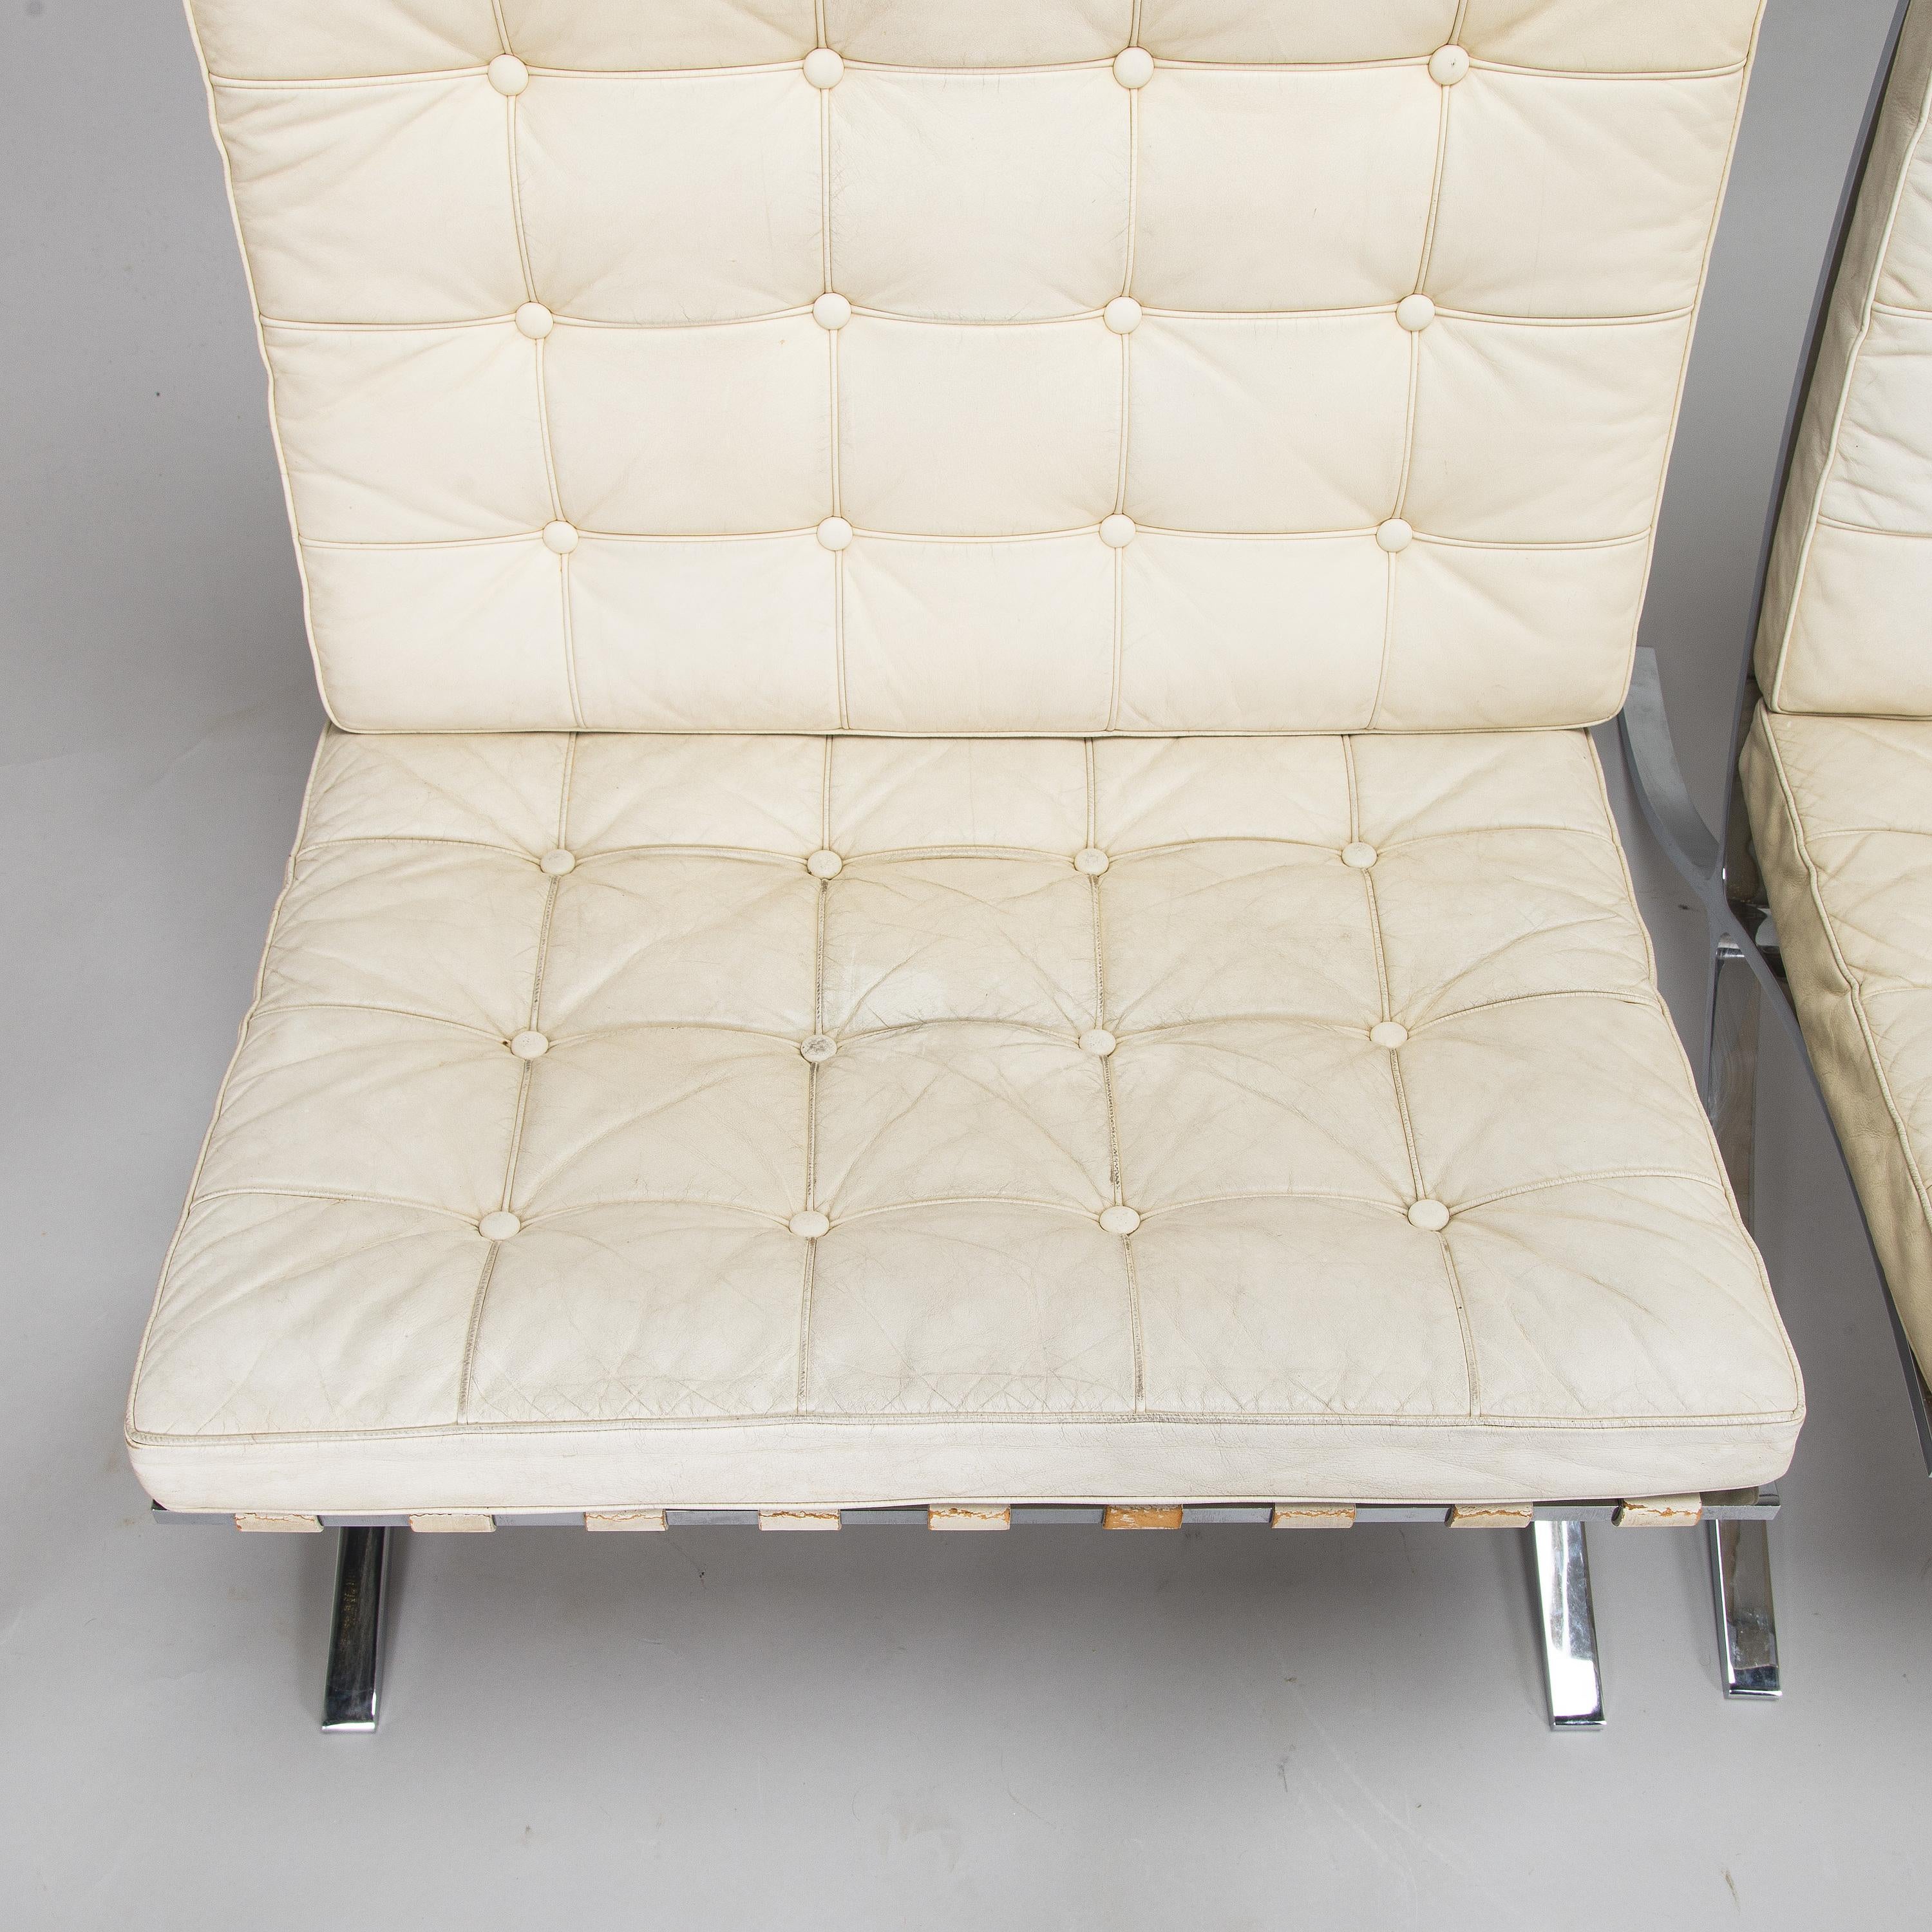 Ludwig Mies van der Rohe 'Barcelona' chair for Knoll made in USA 1965 For Sale 2